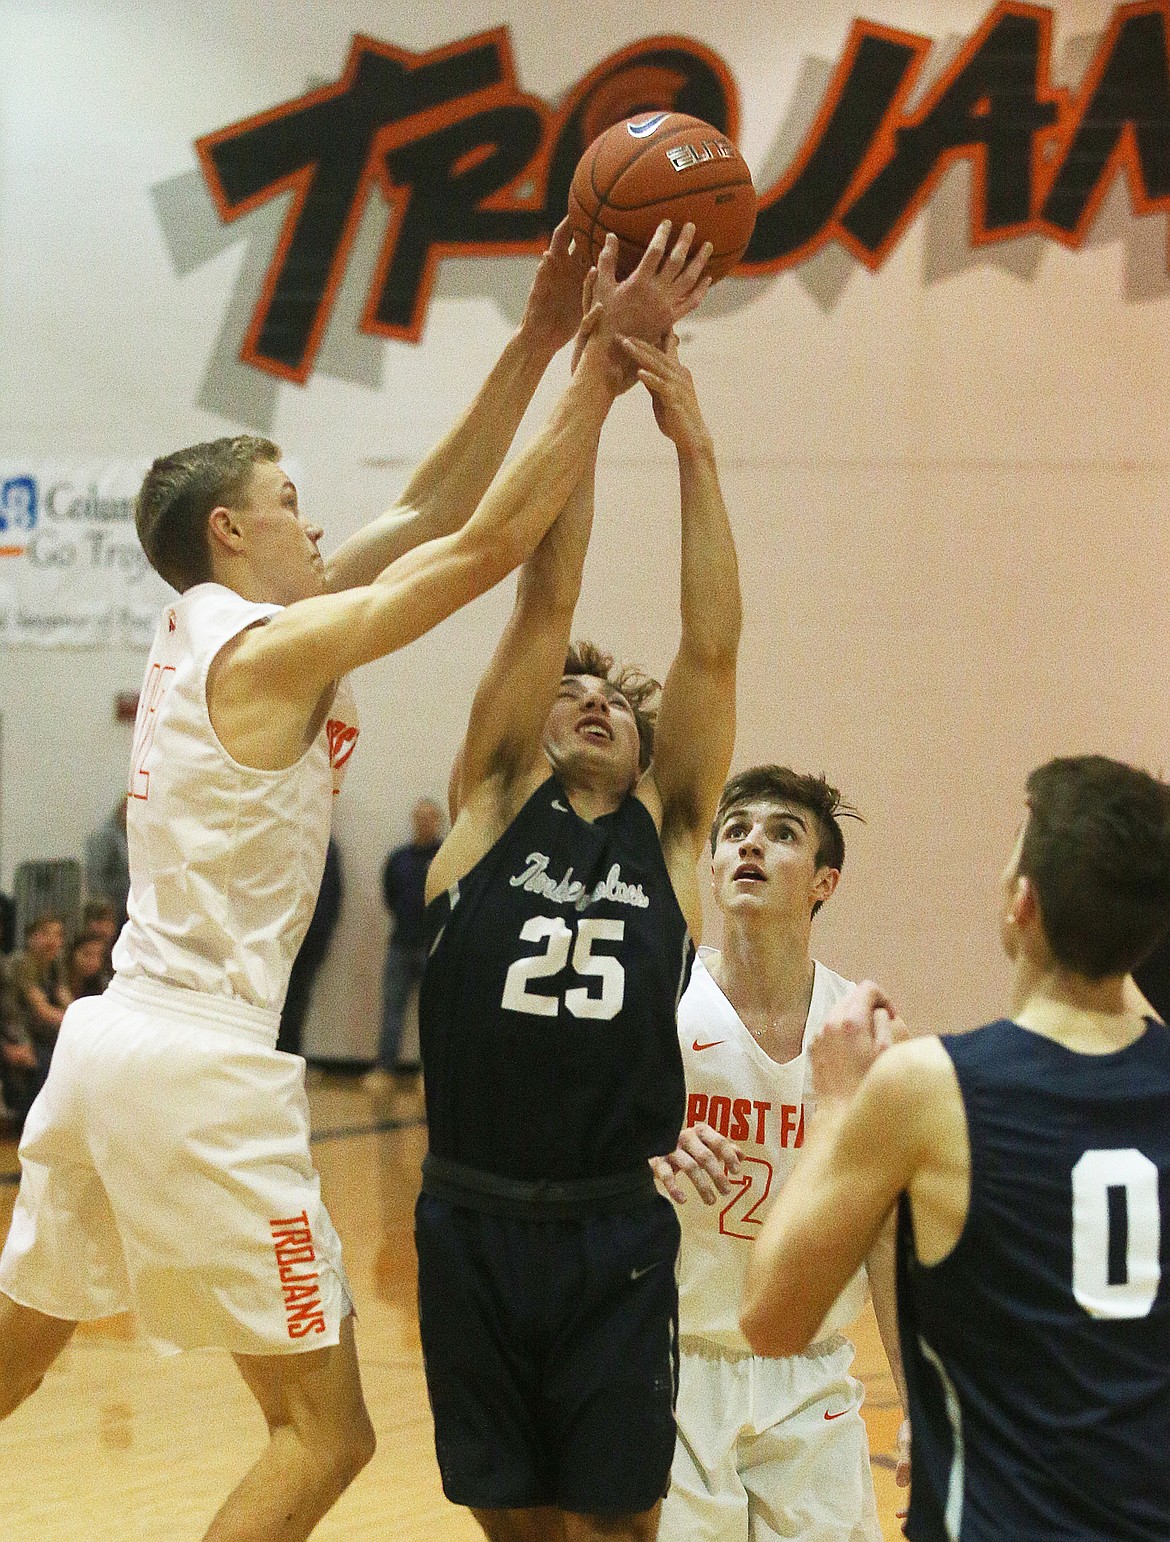 Post Falls guard Gavven Desjarlais, left, and Dylan Brum battle for a rebound in the second half of Tuesday night's game in Post Falls. (LOREN BENOIT/Press)